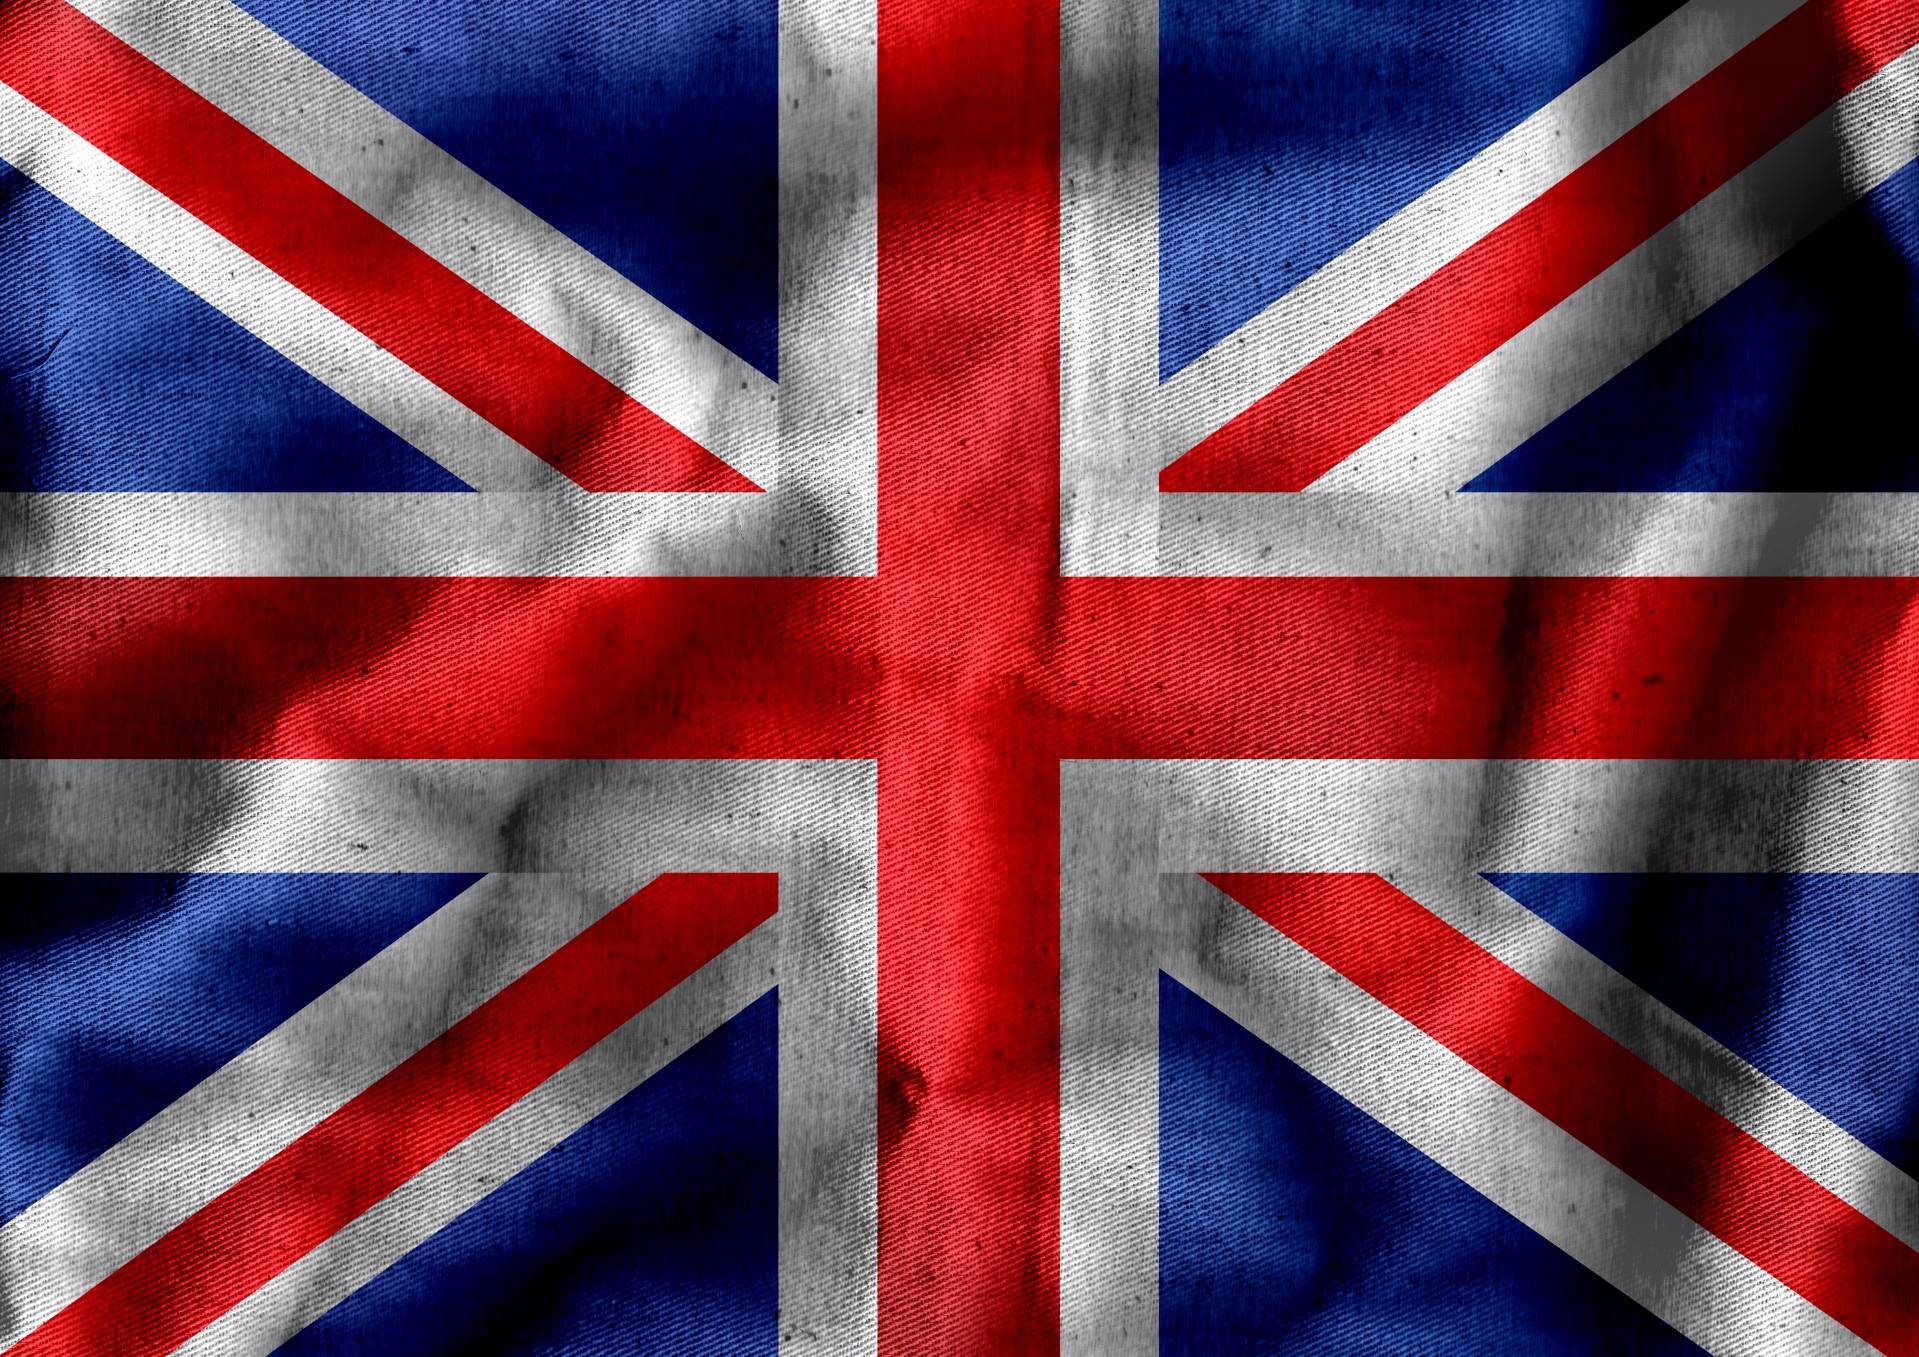 National flag of UK, the United Kingdom of Great Britain and Northern Ireland idea design